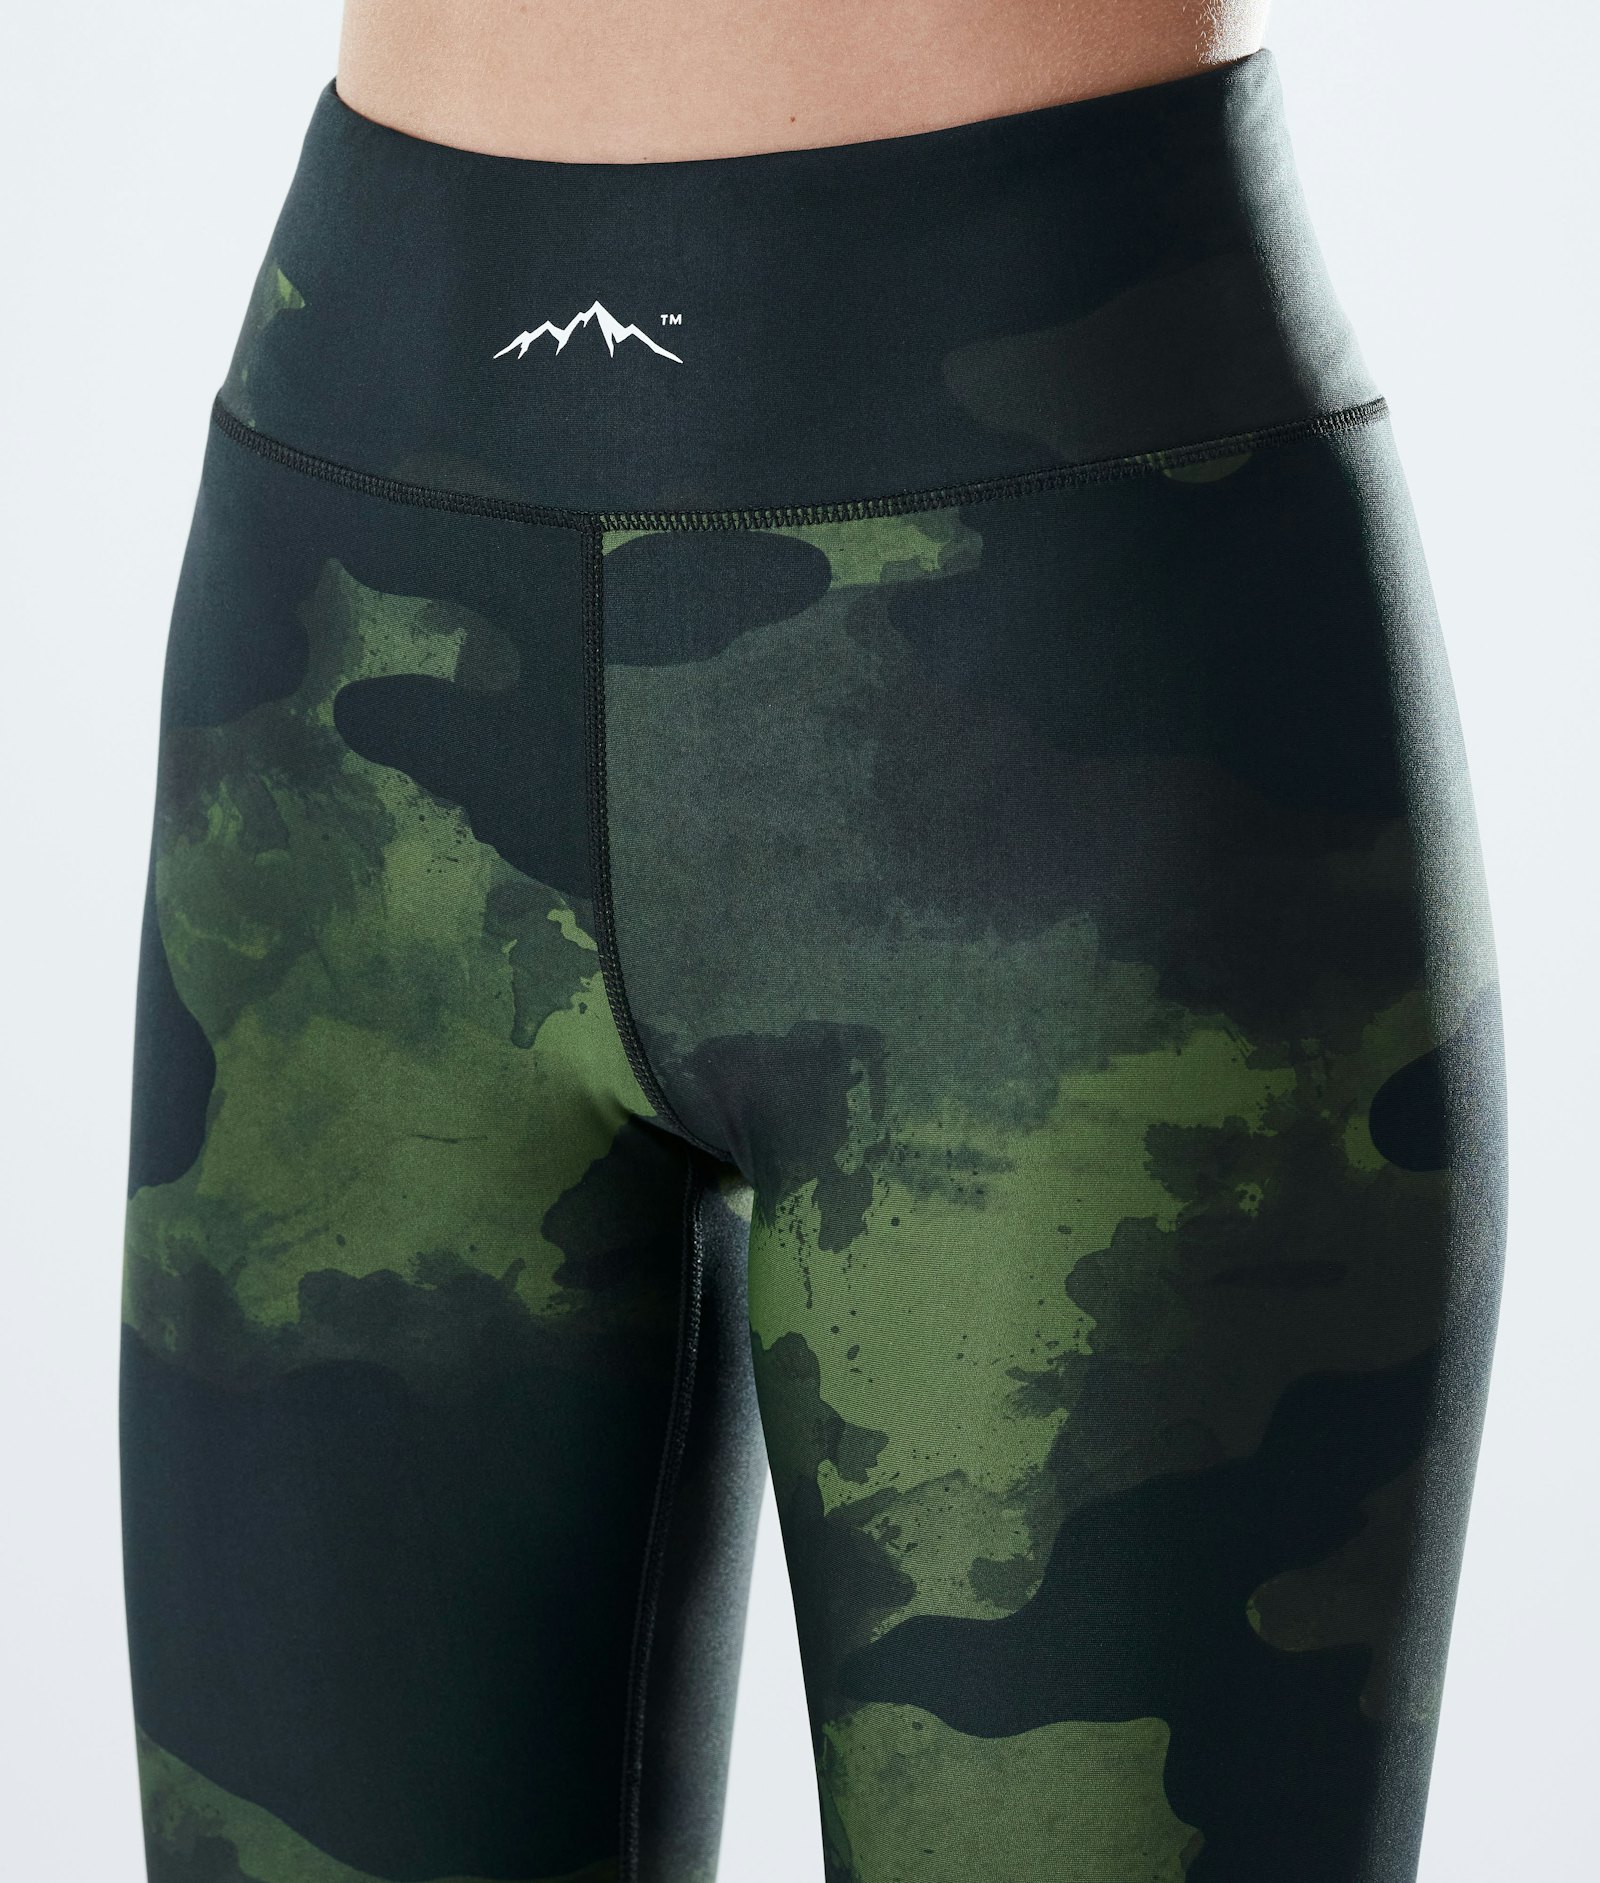 GREEN SALE - Bamboo Leggings with Slit – Anne Mulaire